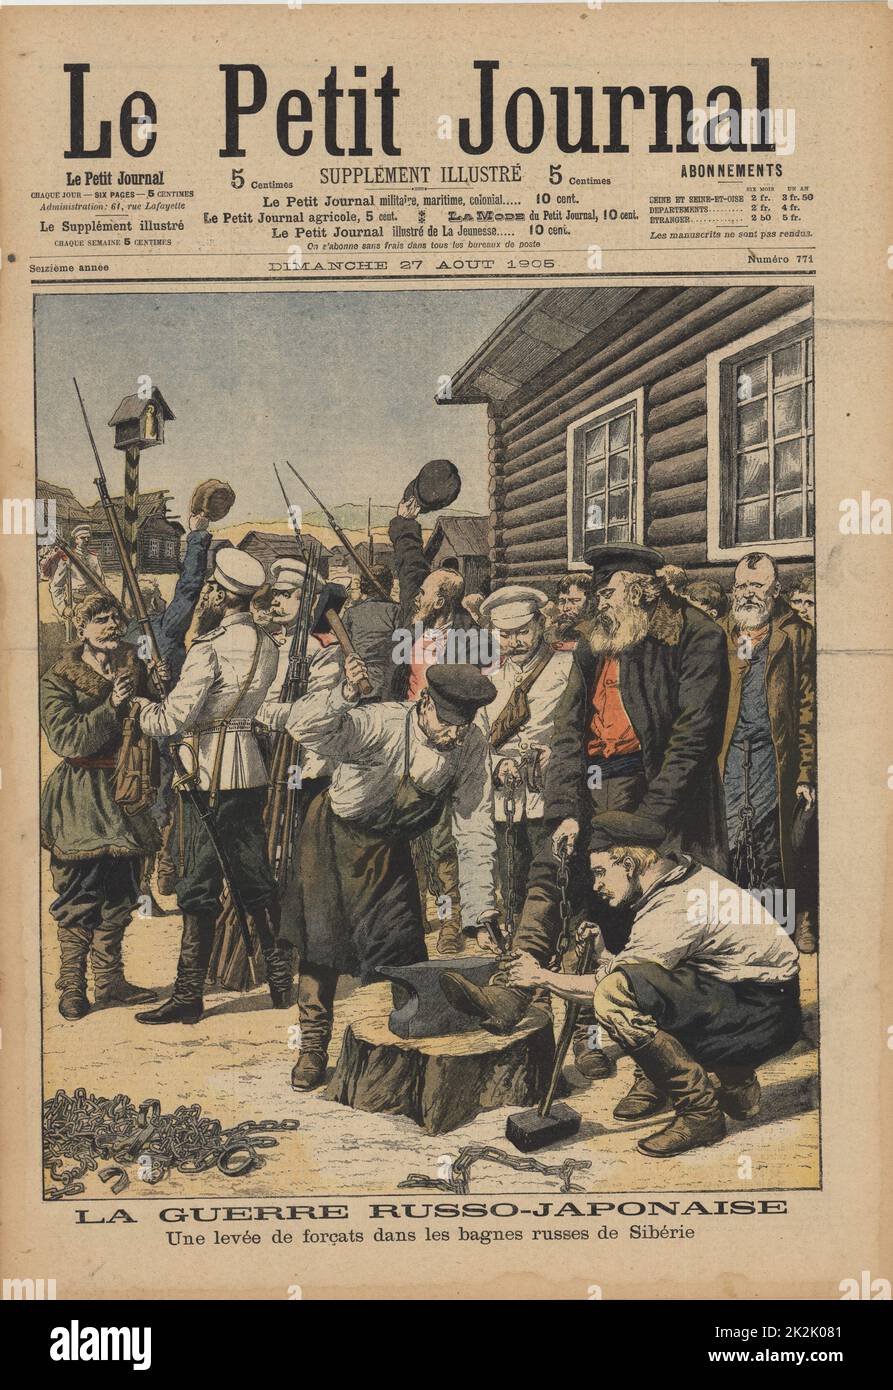 Russo-Japanese War 1904-1905: Russian political prisoners in Siberia being released from their shackles and given their liberty on condition they defend their country against the Japanese.  From 'Le Petit Journal', Paris, 27 August 1905. Stock Photo